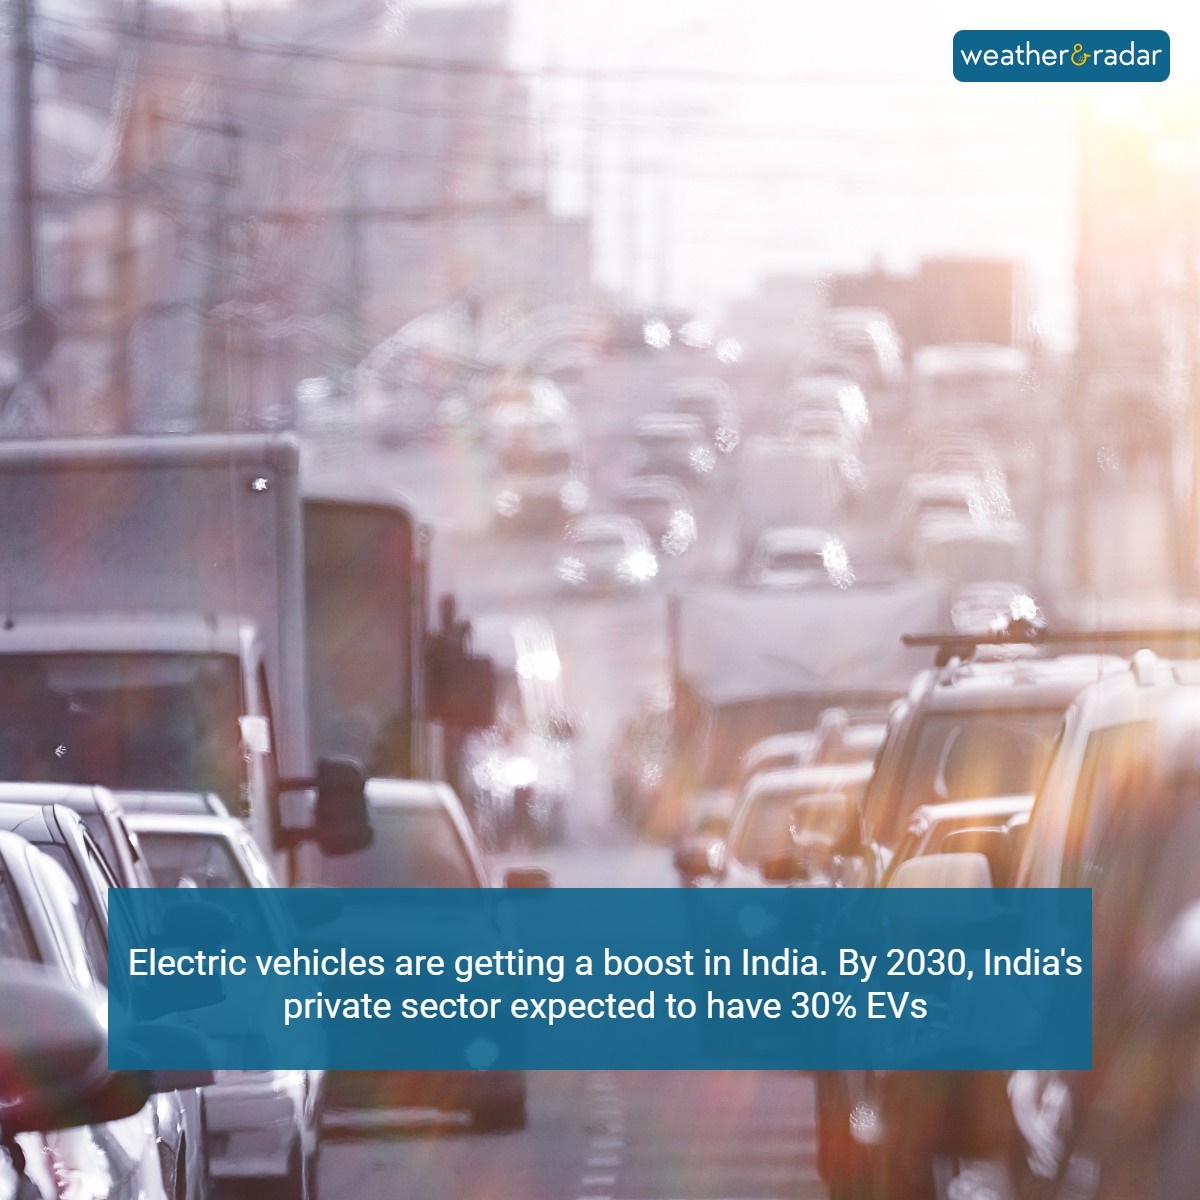 ❗👉 To reduce pollution, Delhi's ambitious plan is to increase EVs. The government has removed customs duties on capital goods/machinery that make lithium-ion cells for electric vehicles (EVs).  A step towards a greener #India.

#Delhi #pollution #pollutioncontrol  #NewsUpdate